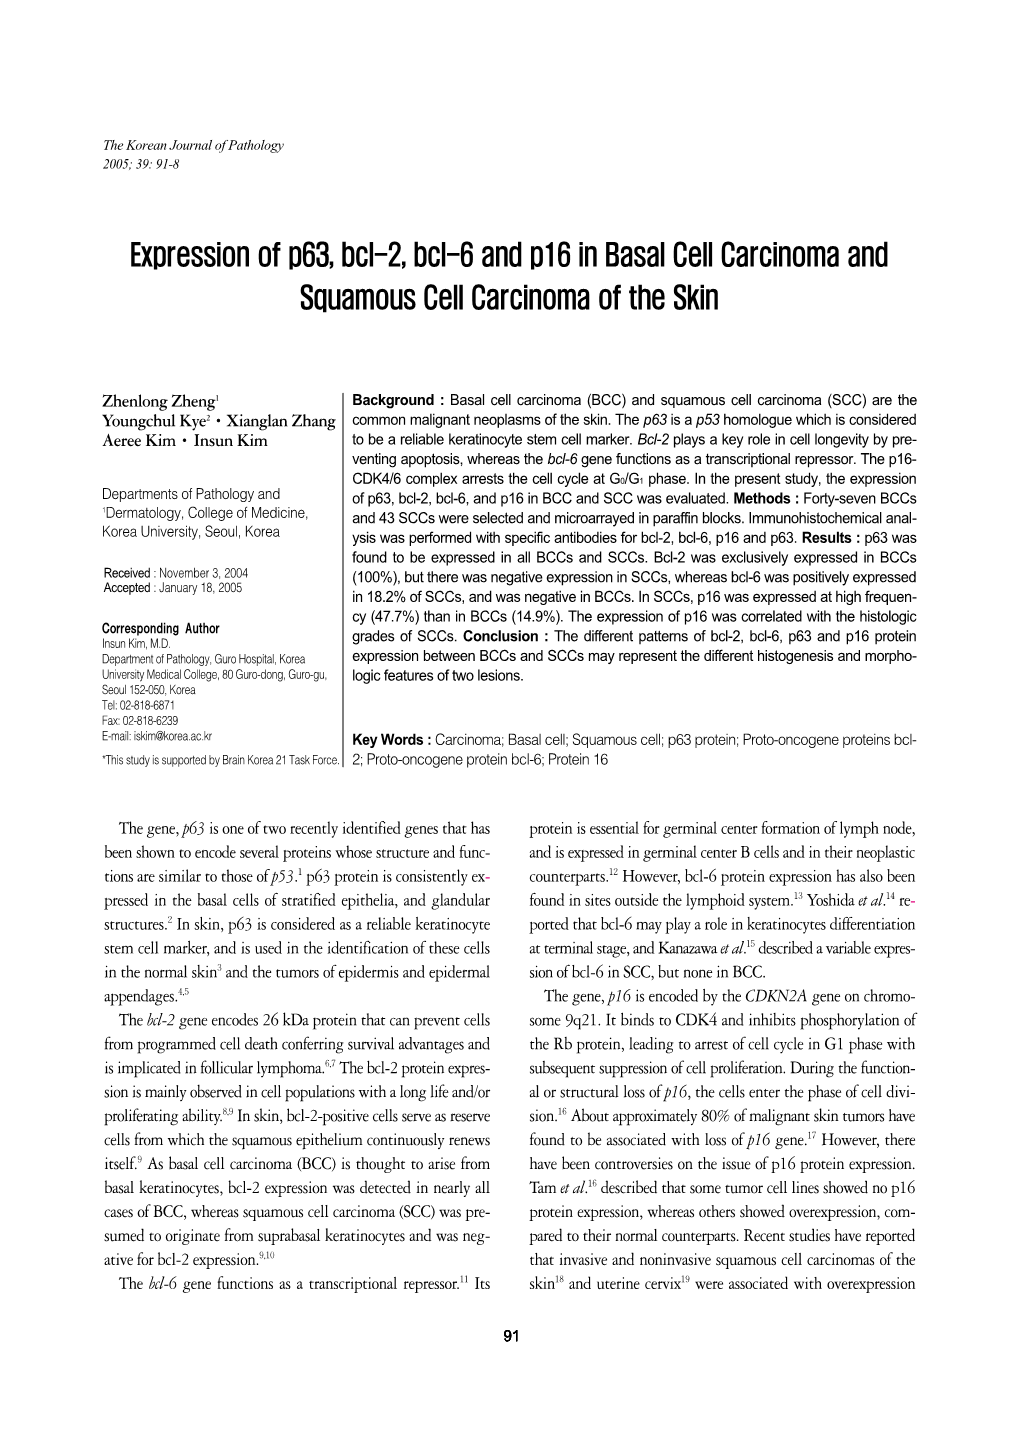 Expression of P63, Bcl-2, Bcl-6 and P16 in Basal Cell Carcinoma and Squamous Cell Carcinoma of the Skin